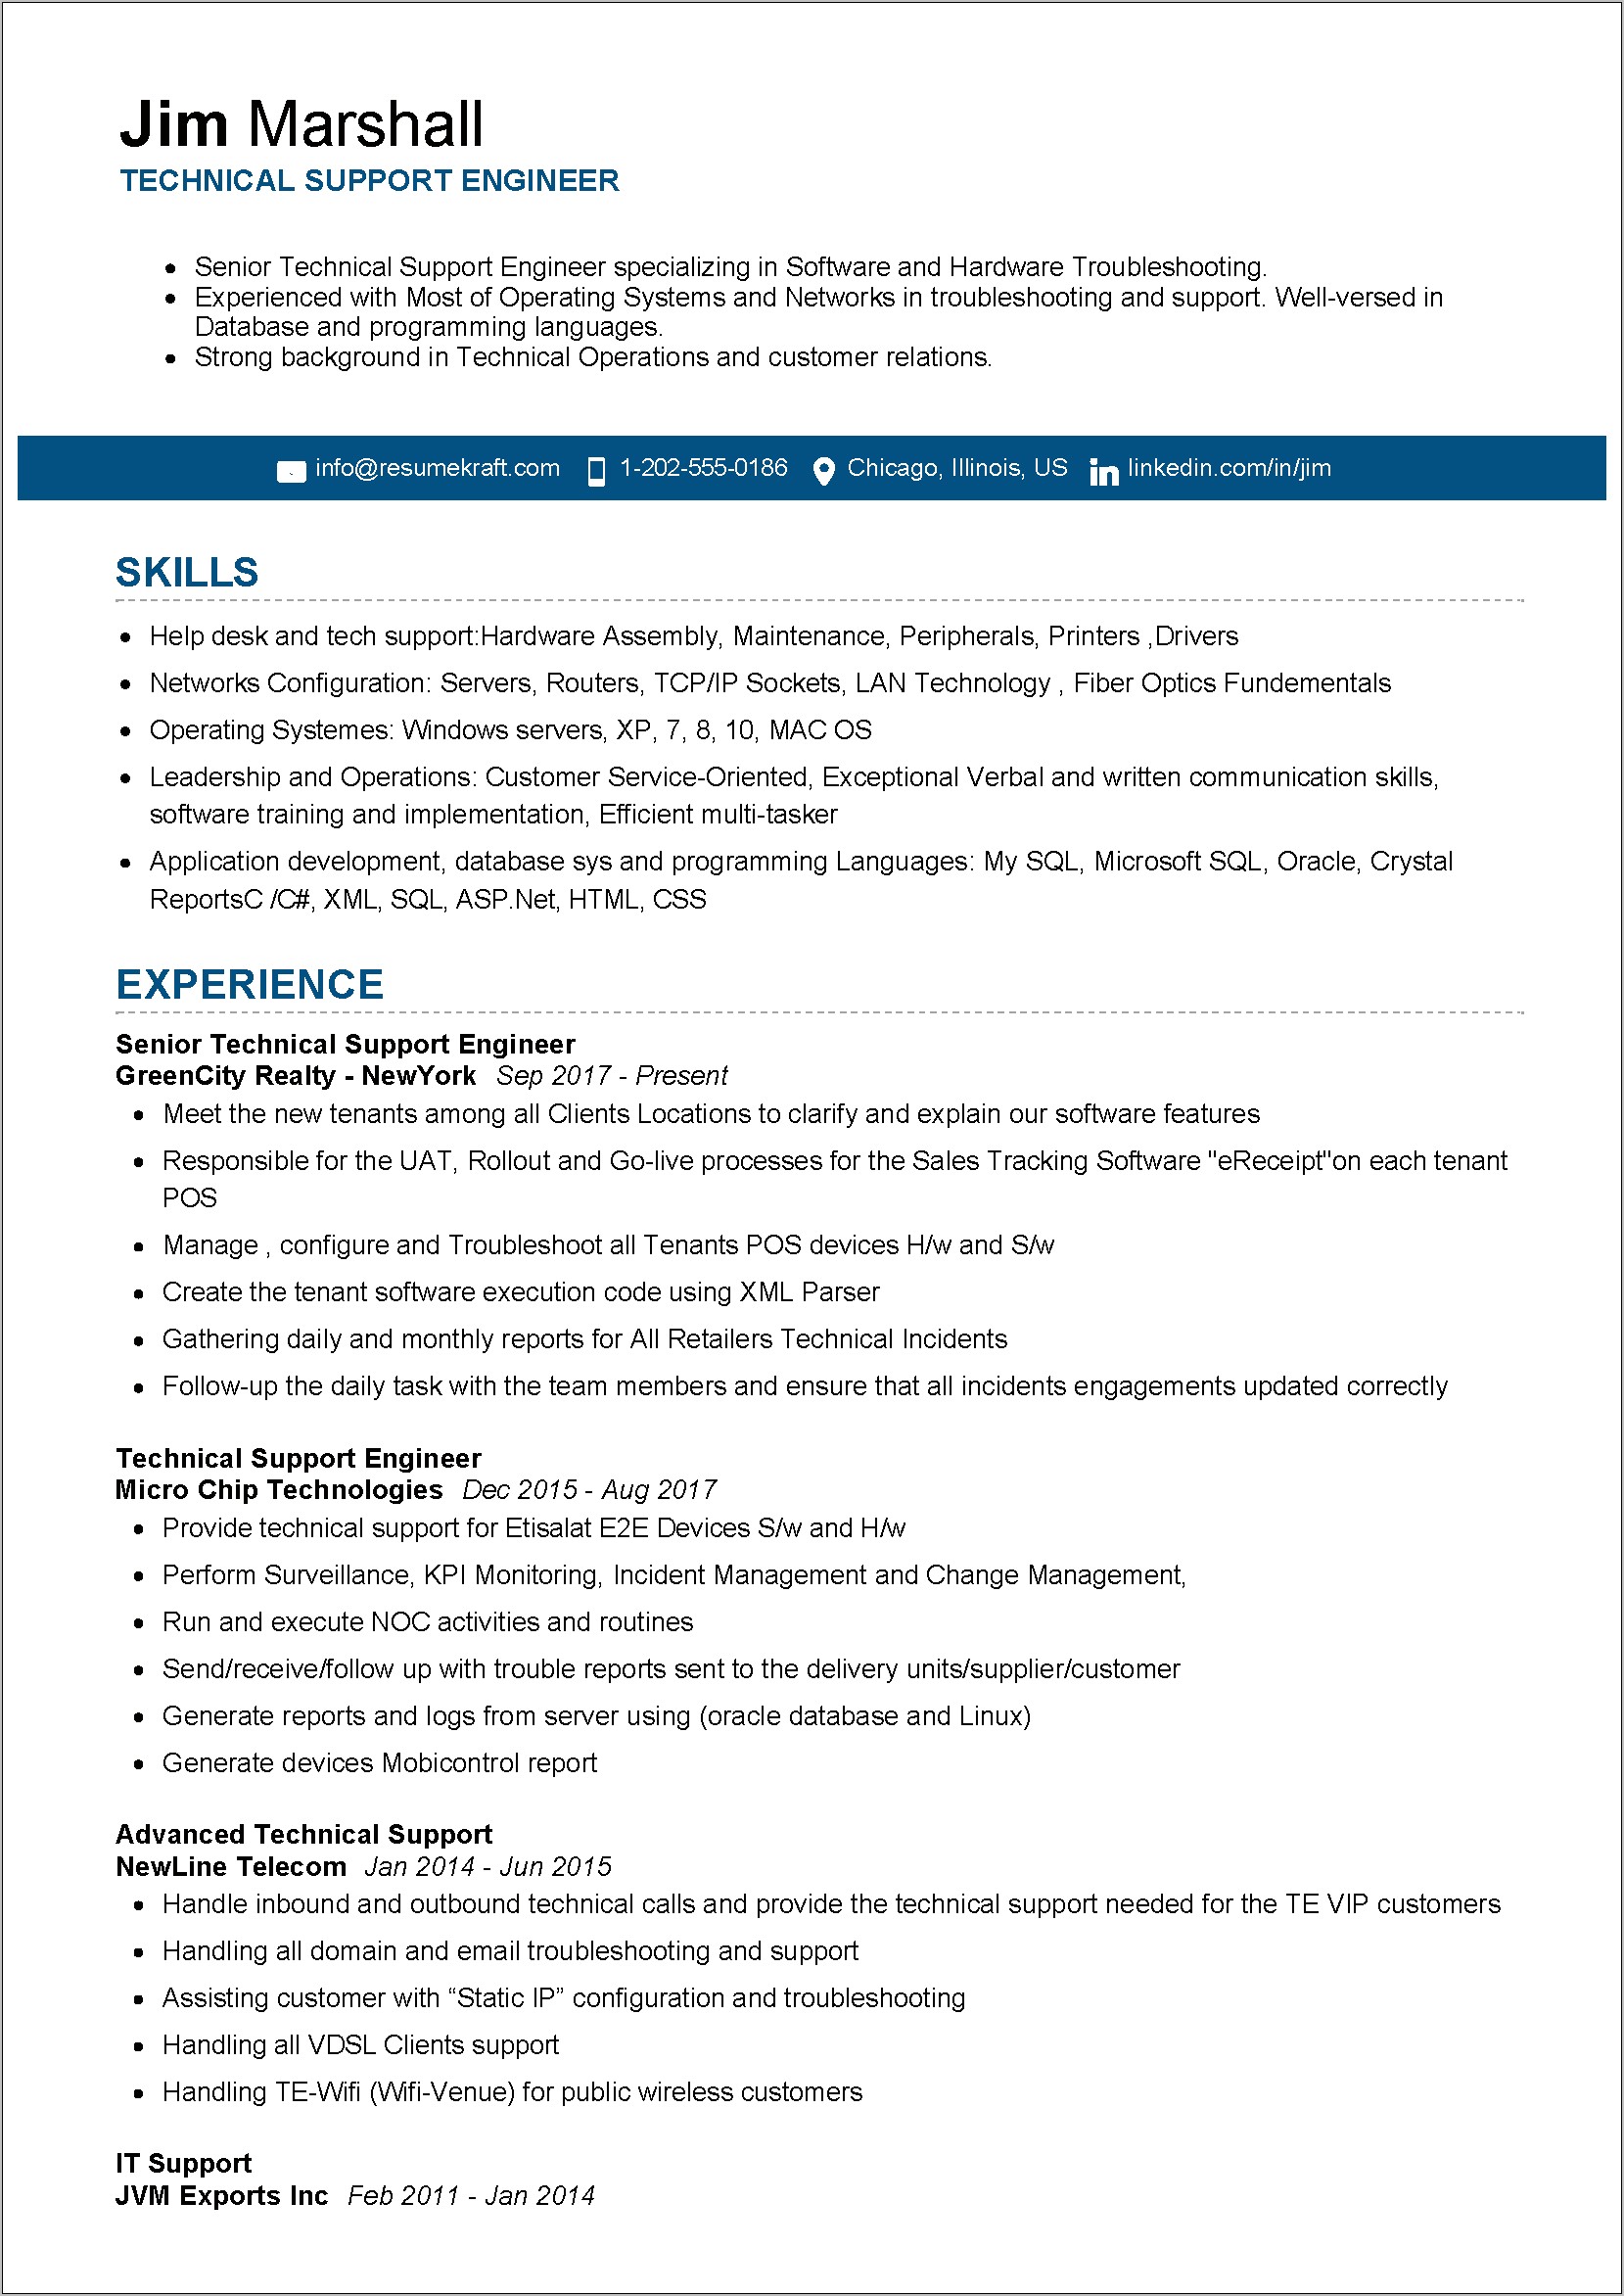 Resume Objective For Telecom Engineer